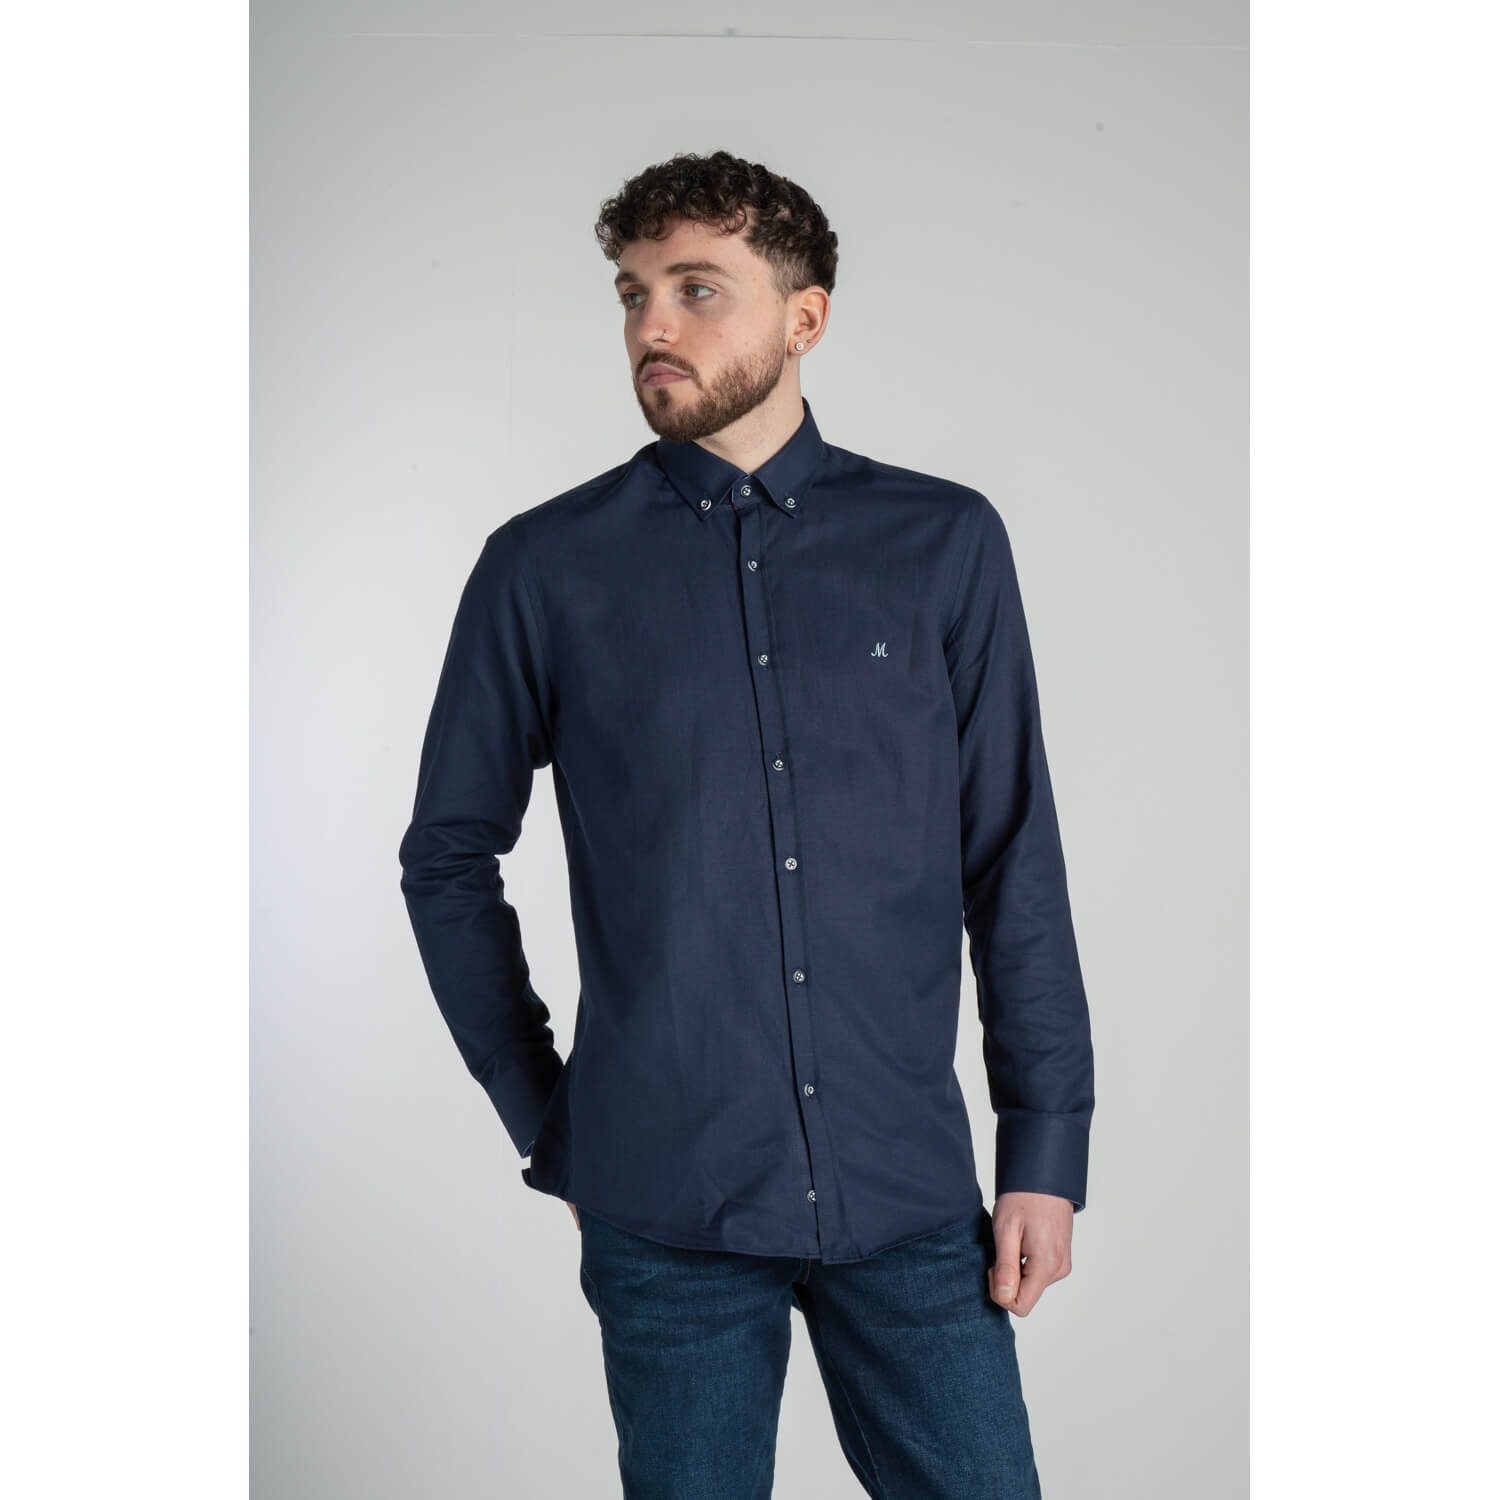 Mineral Lolland Long-sleeve Shirt - Navy 1 Shaws Department Stores